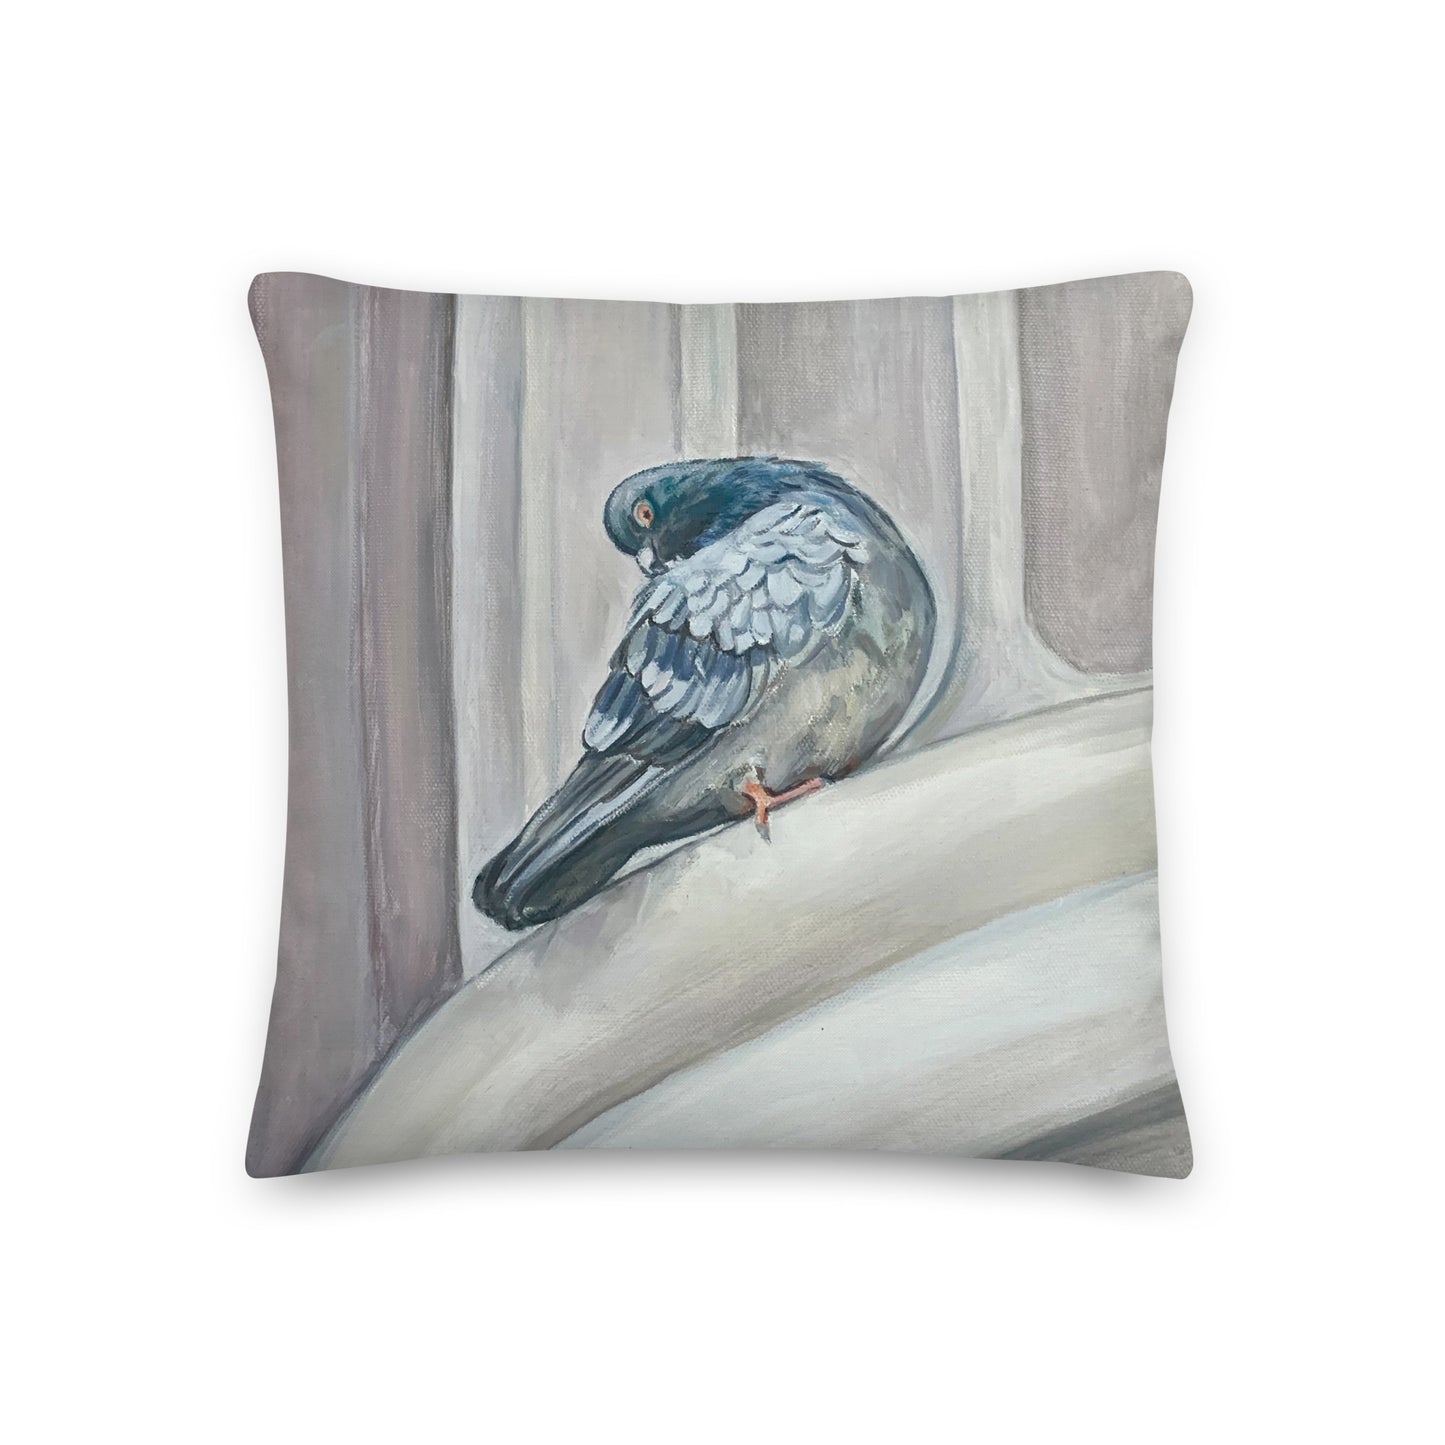 Premium Double-Sided Pigeon Pillow II (Pigeons at the Metropolitan Museum of Art, NYC)